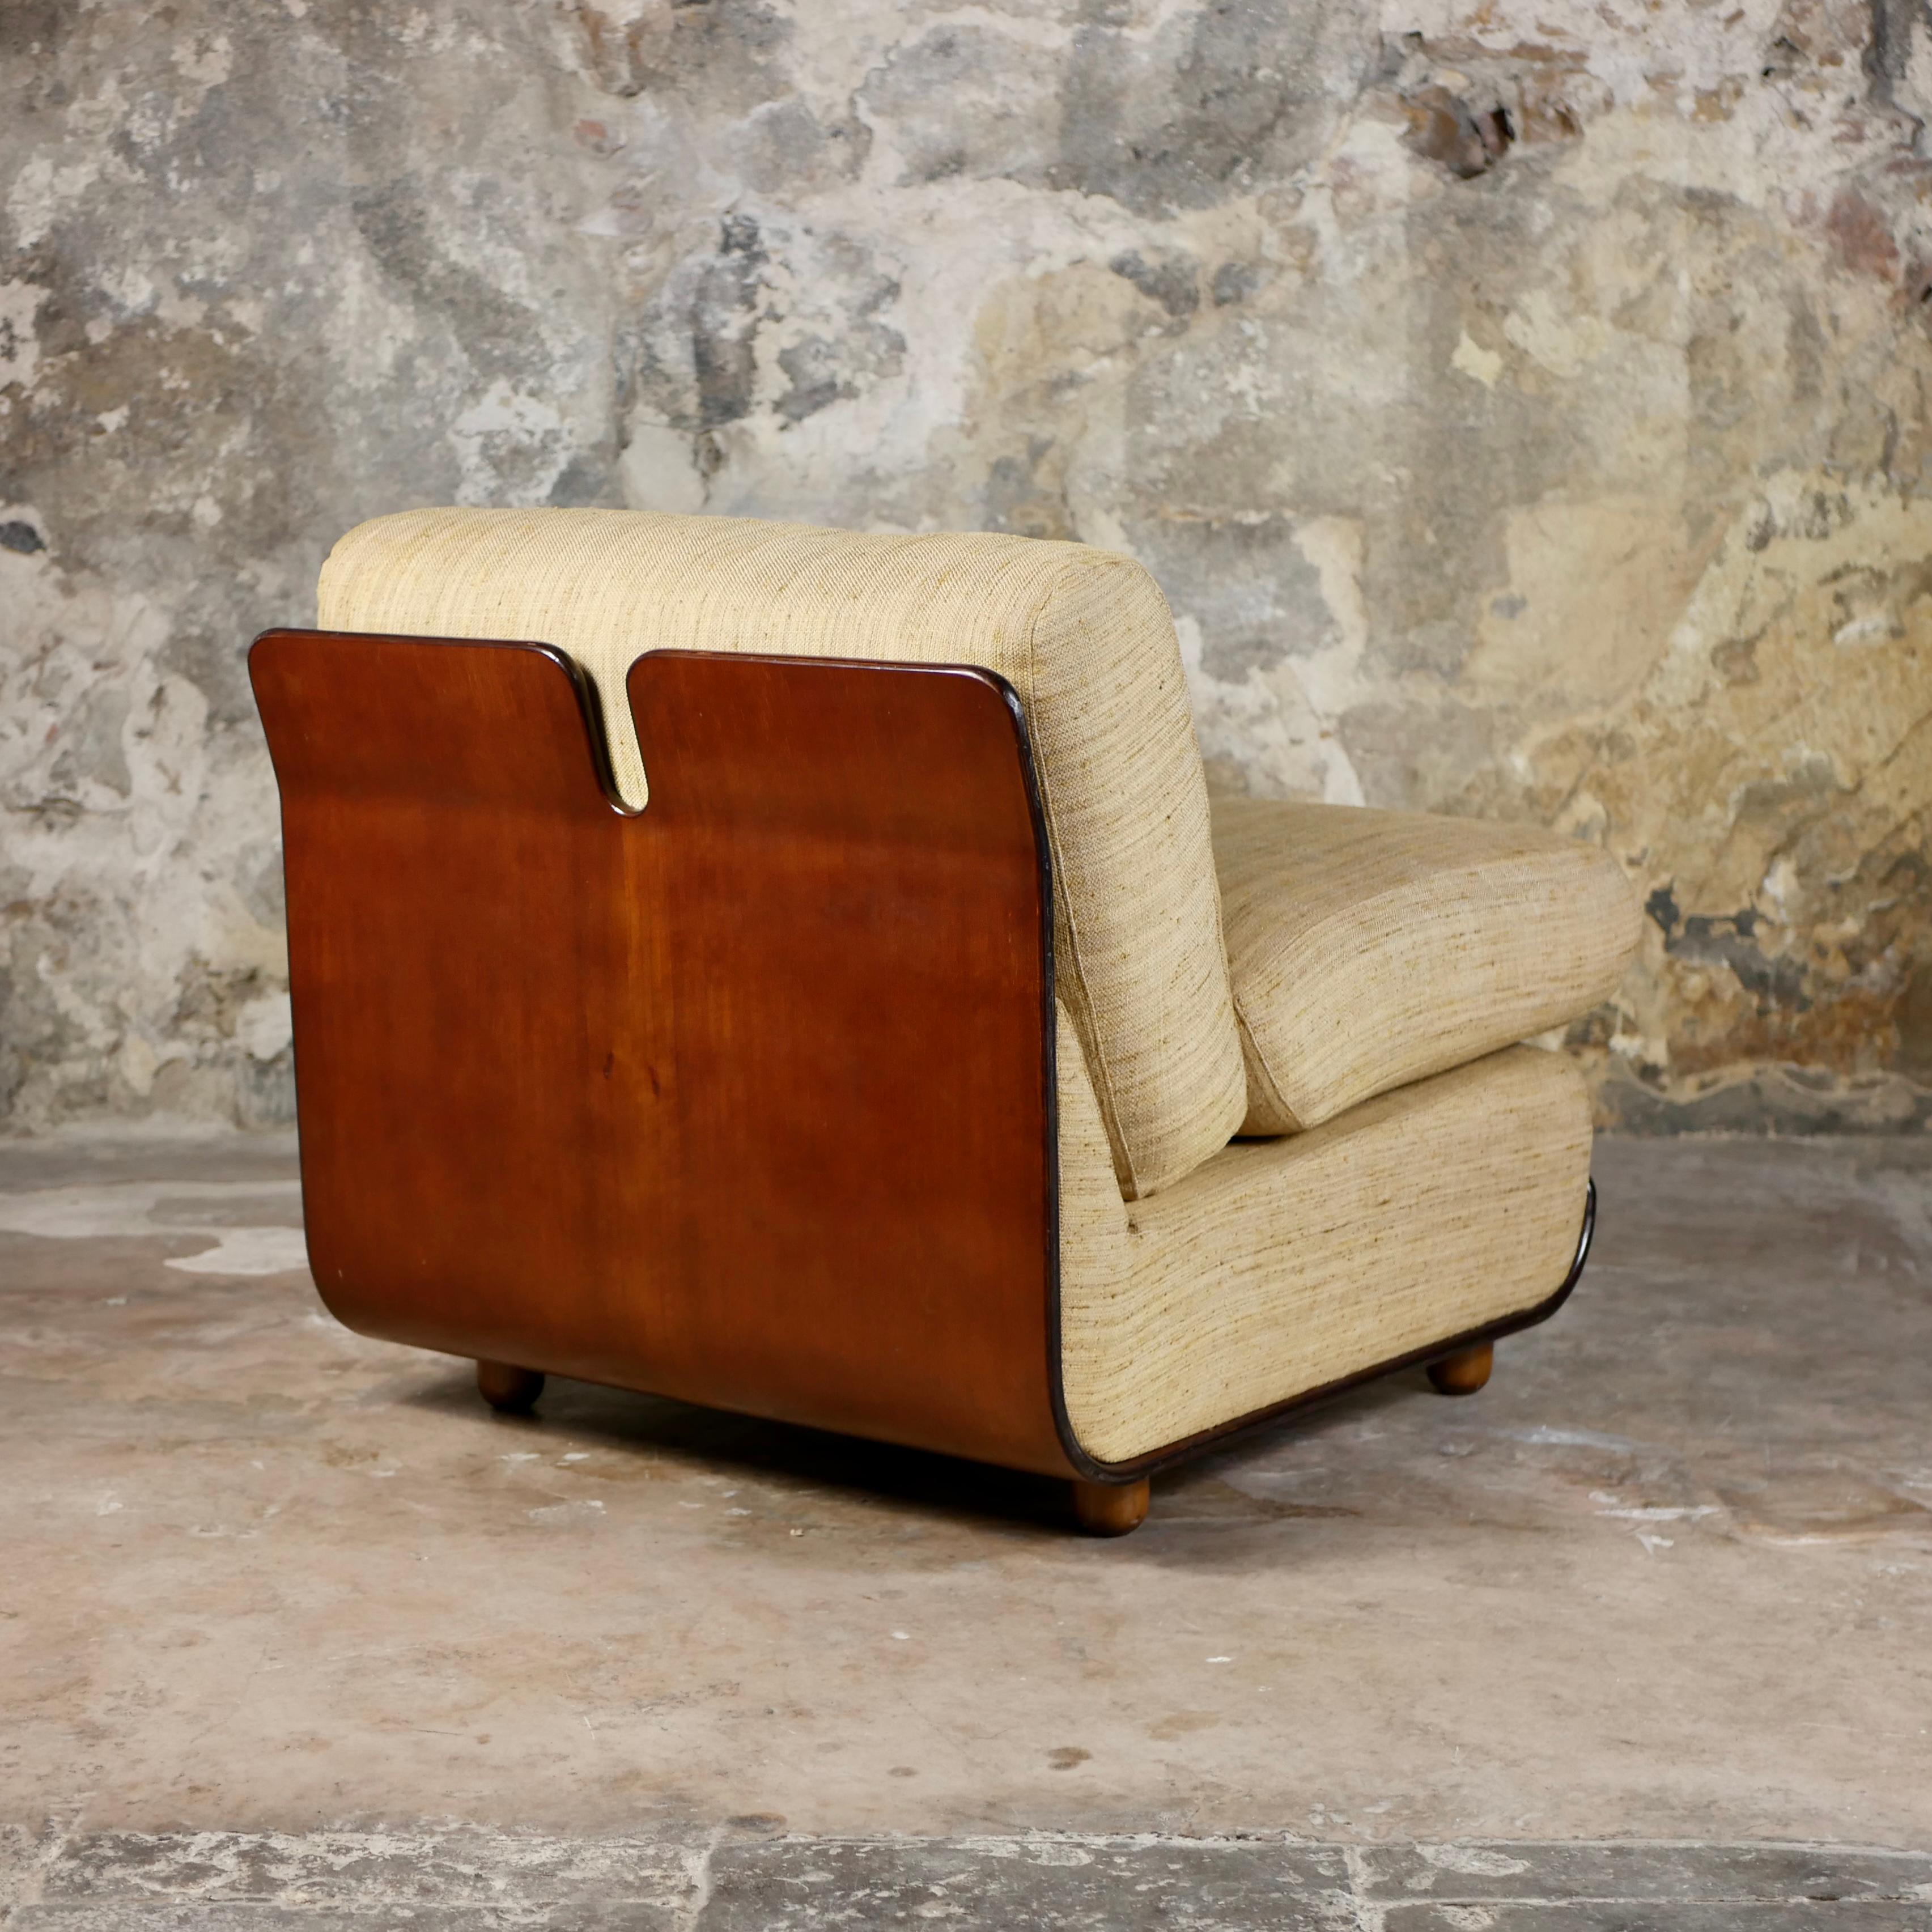 Late 20th Century Italian pale yellow armchair in the style of Mario Bellini, 1970s